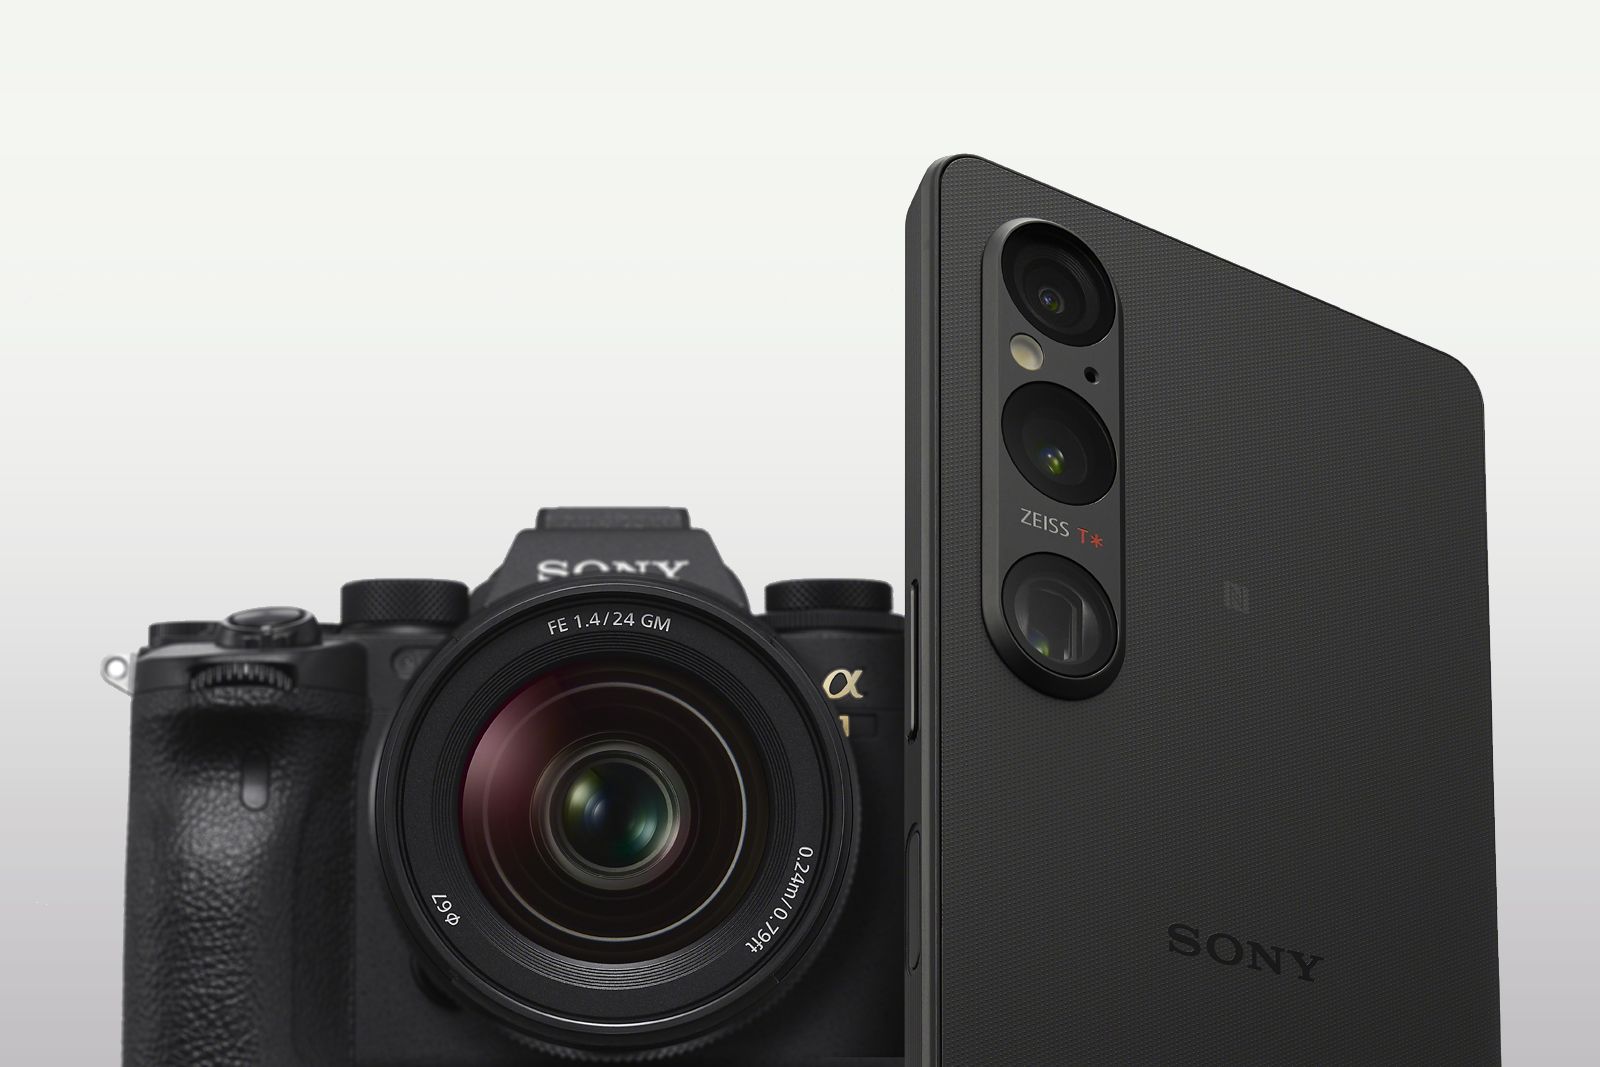 The most important detail about the Sony Xperia 1 V launch is the new camera sensor